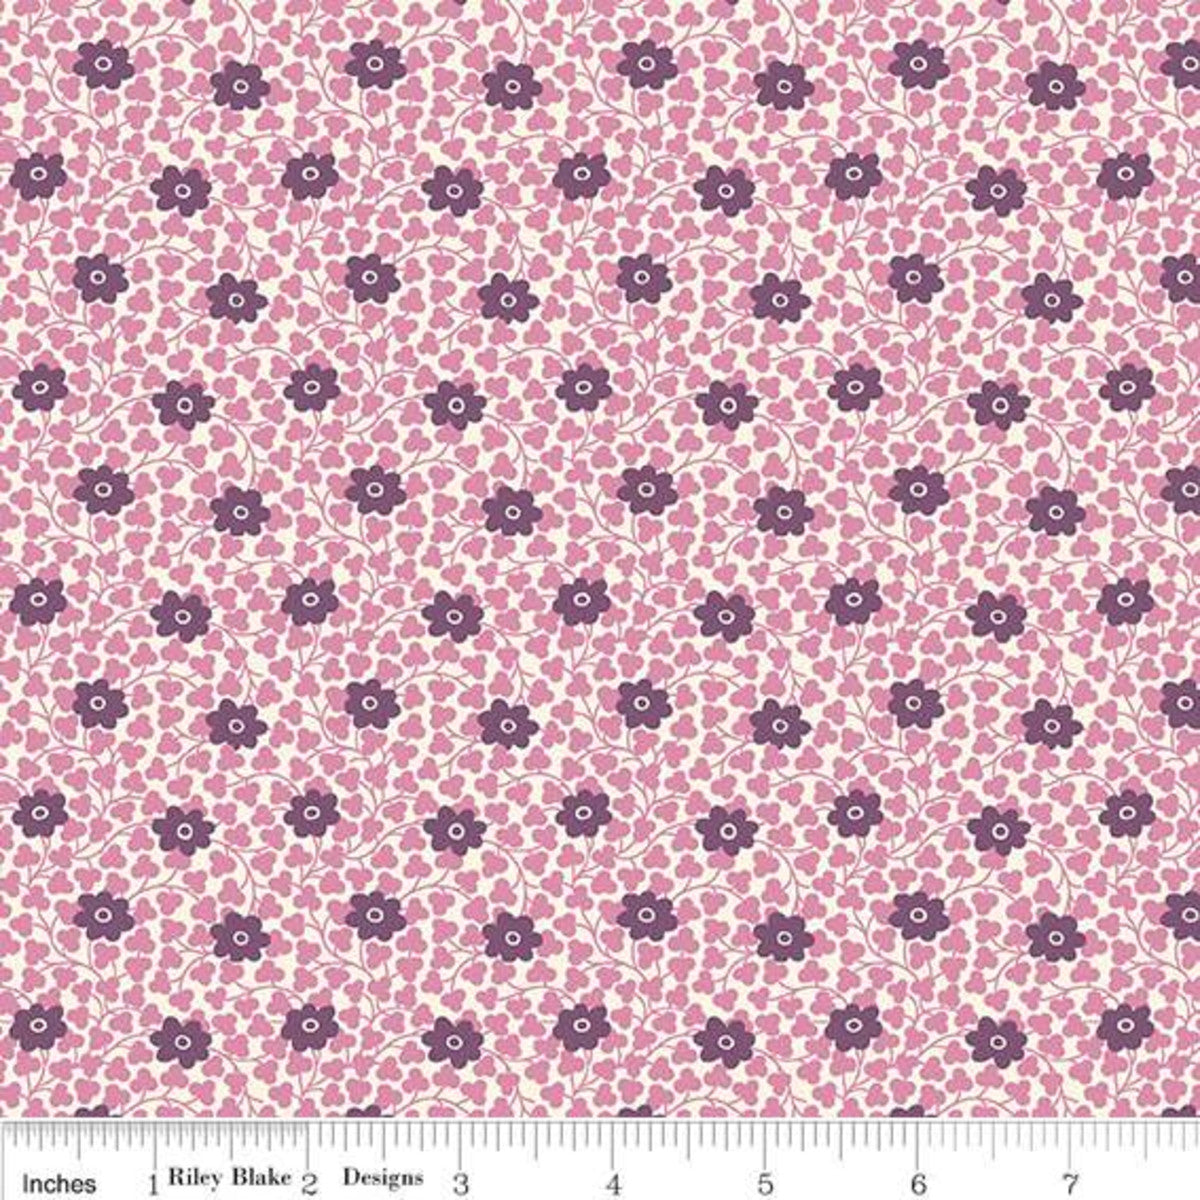 Chelsea Flower Pink - The Flower Show Midnight Garden Collection Liberty - Cotton Fabric ✂️ £10 pm *SALE*